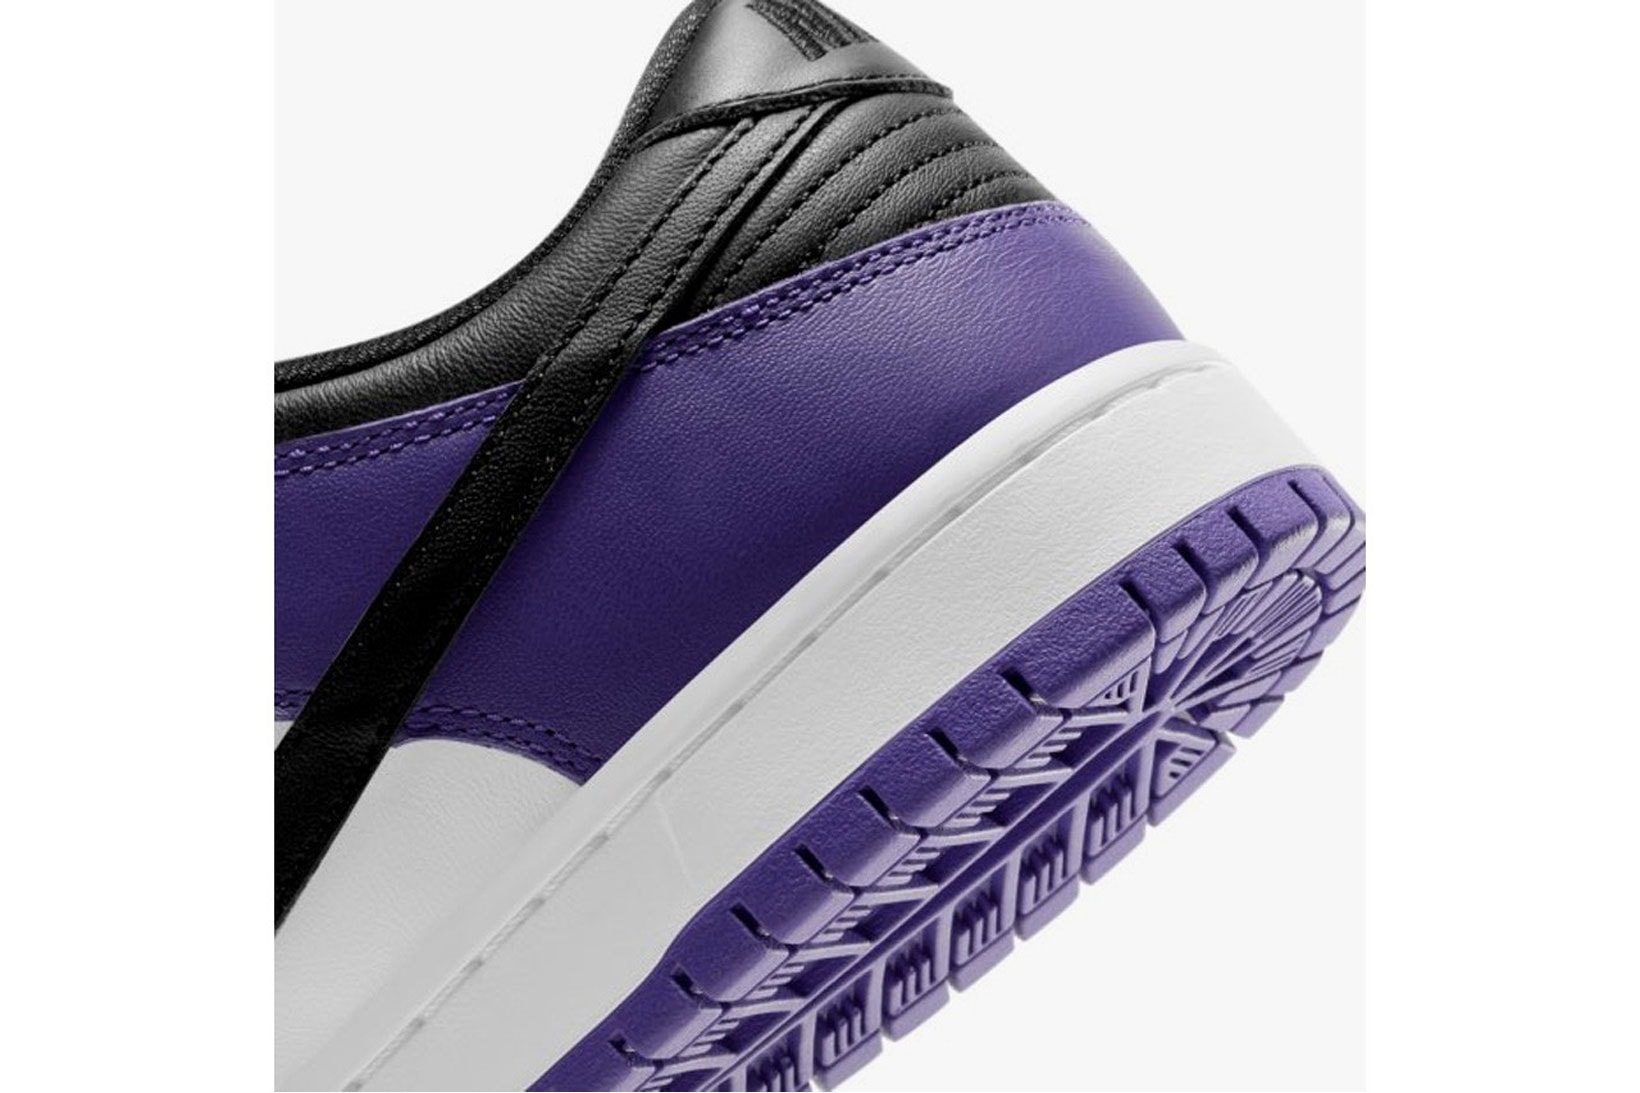 nike sb dunk low court purple black white sneakers official look release close up details